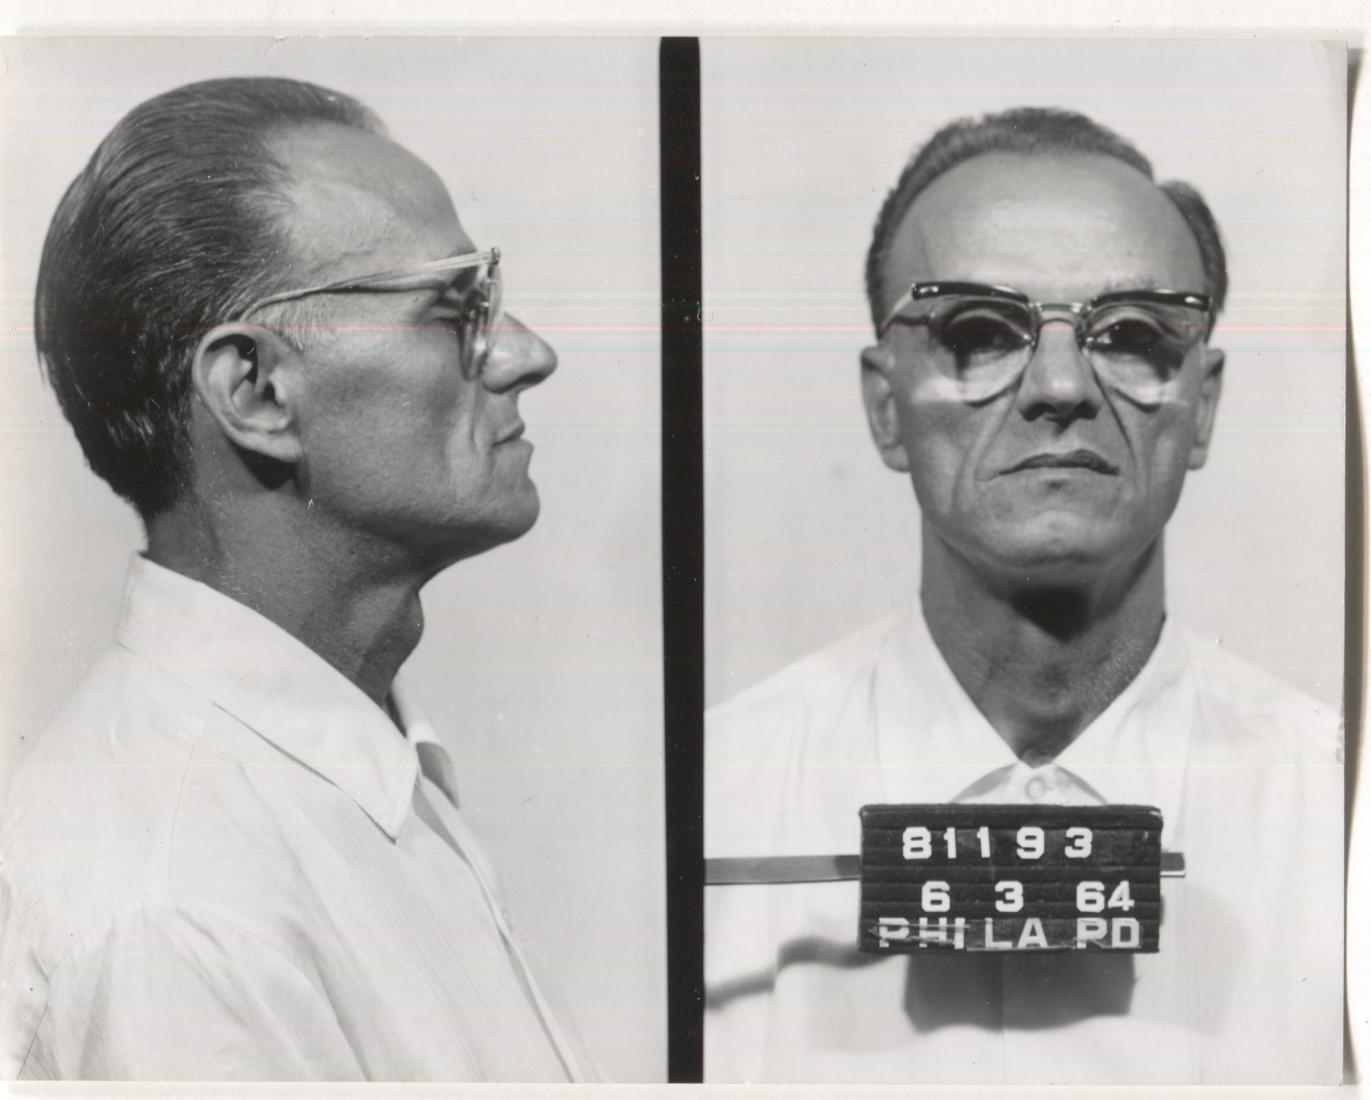 Patrick Palumbo Mugshot - Arrested on 6/3/1964 for Frequenting a Gambling House